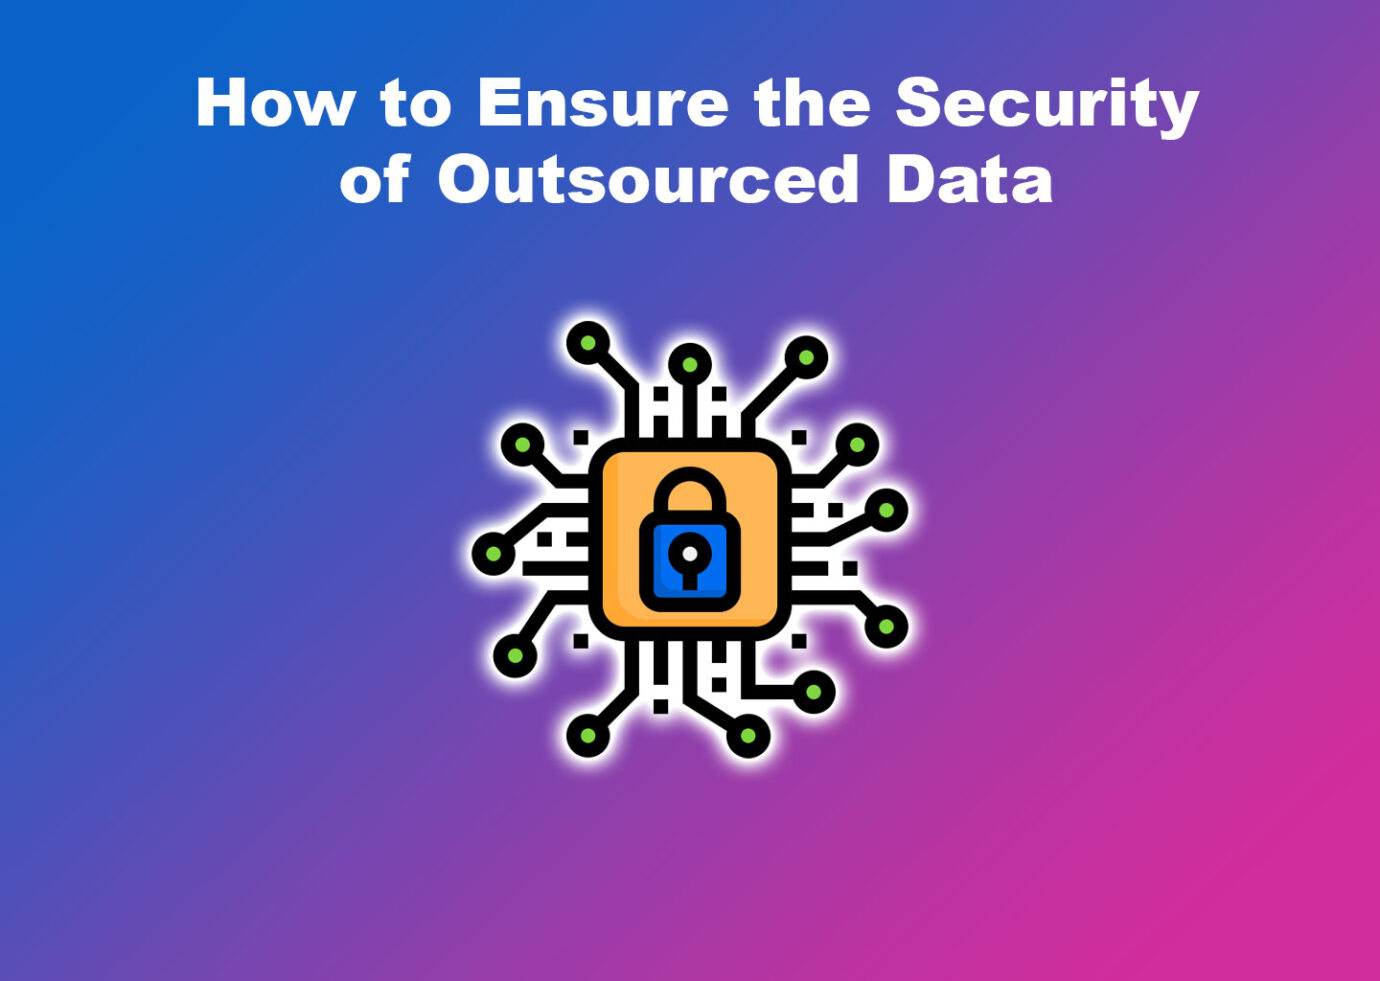 How to Ensure the Security of Outsourced Data